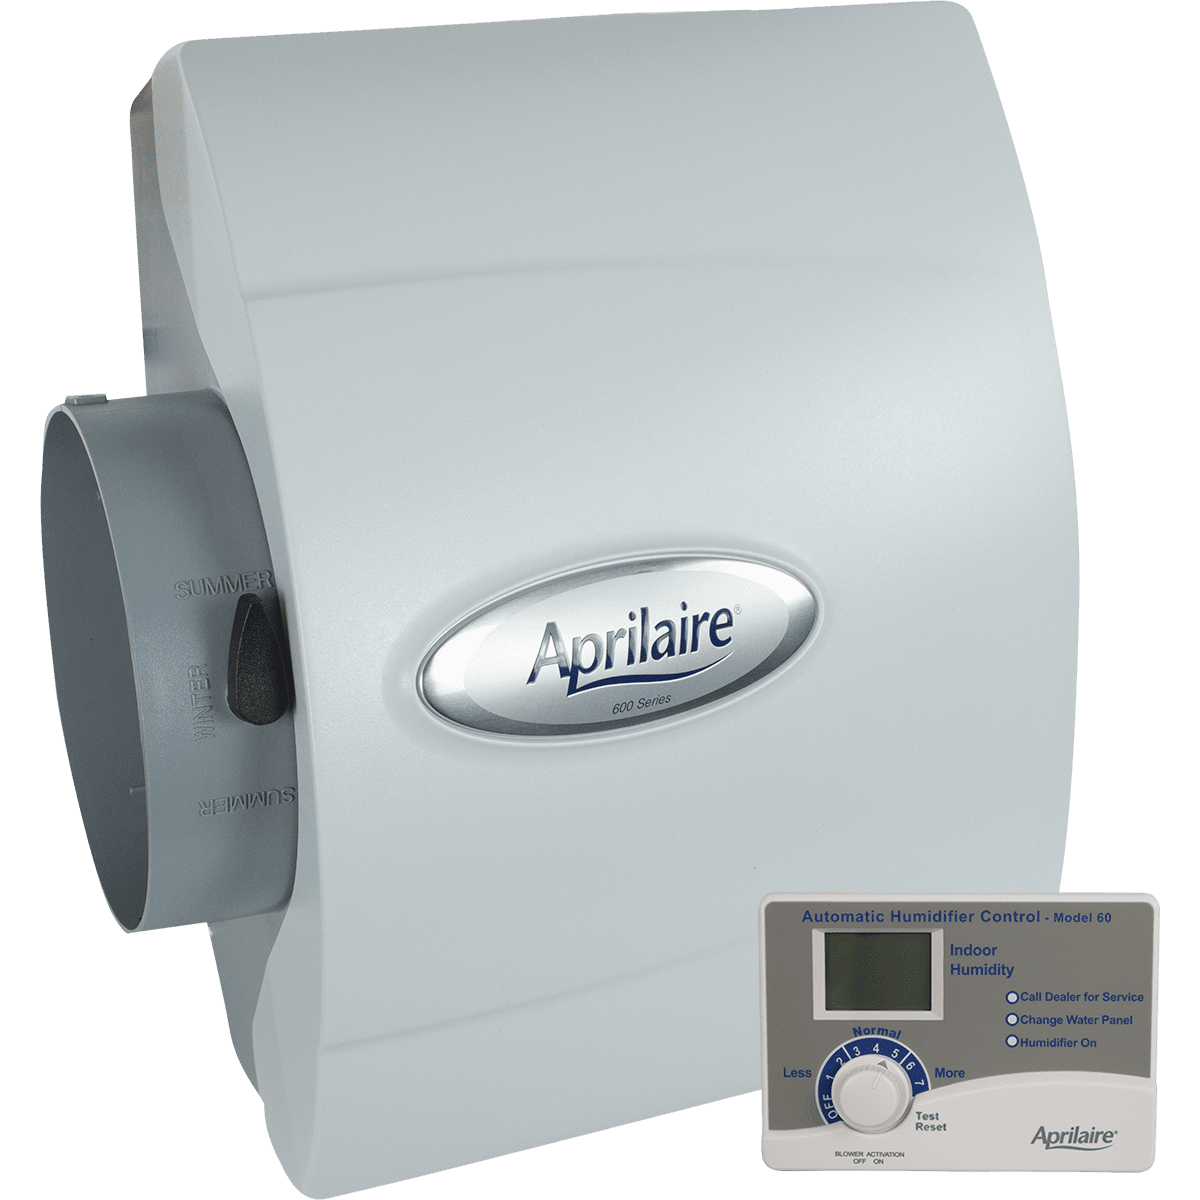 Aprilaire Model 600 Large Bypass Humidifiers - automatic model - Primary View